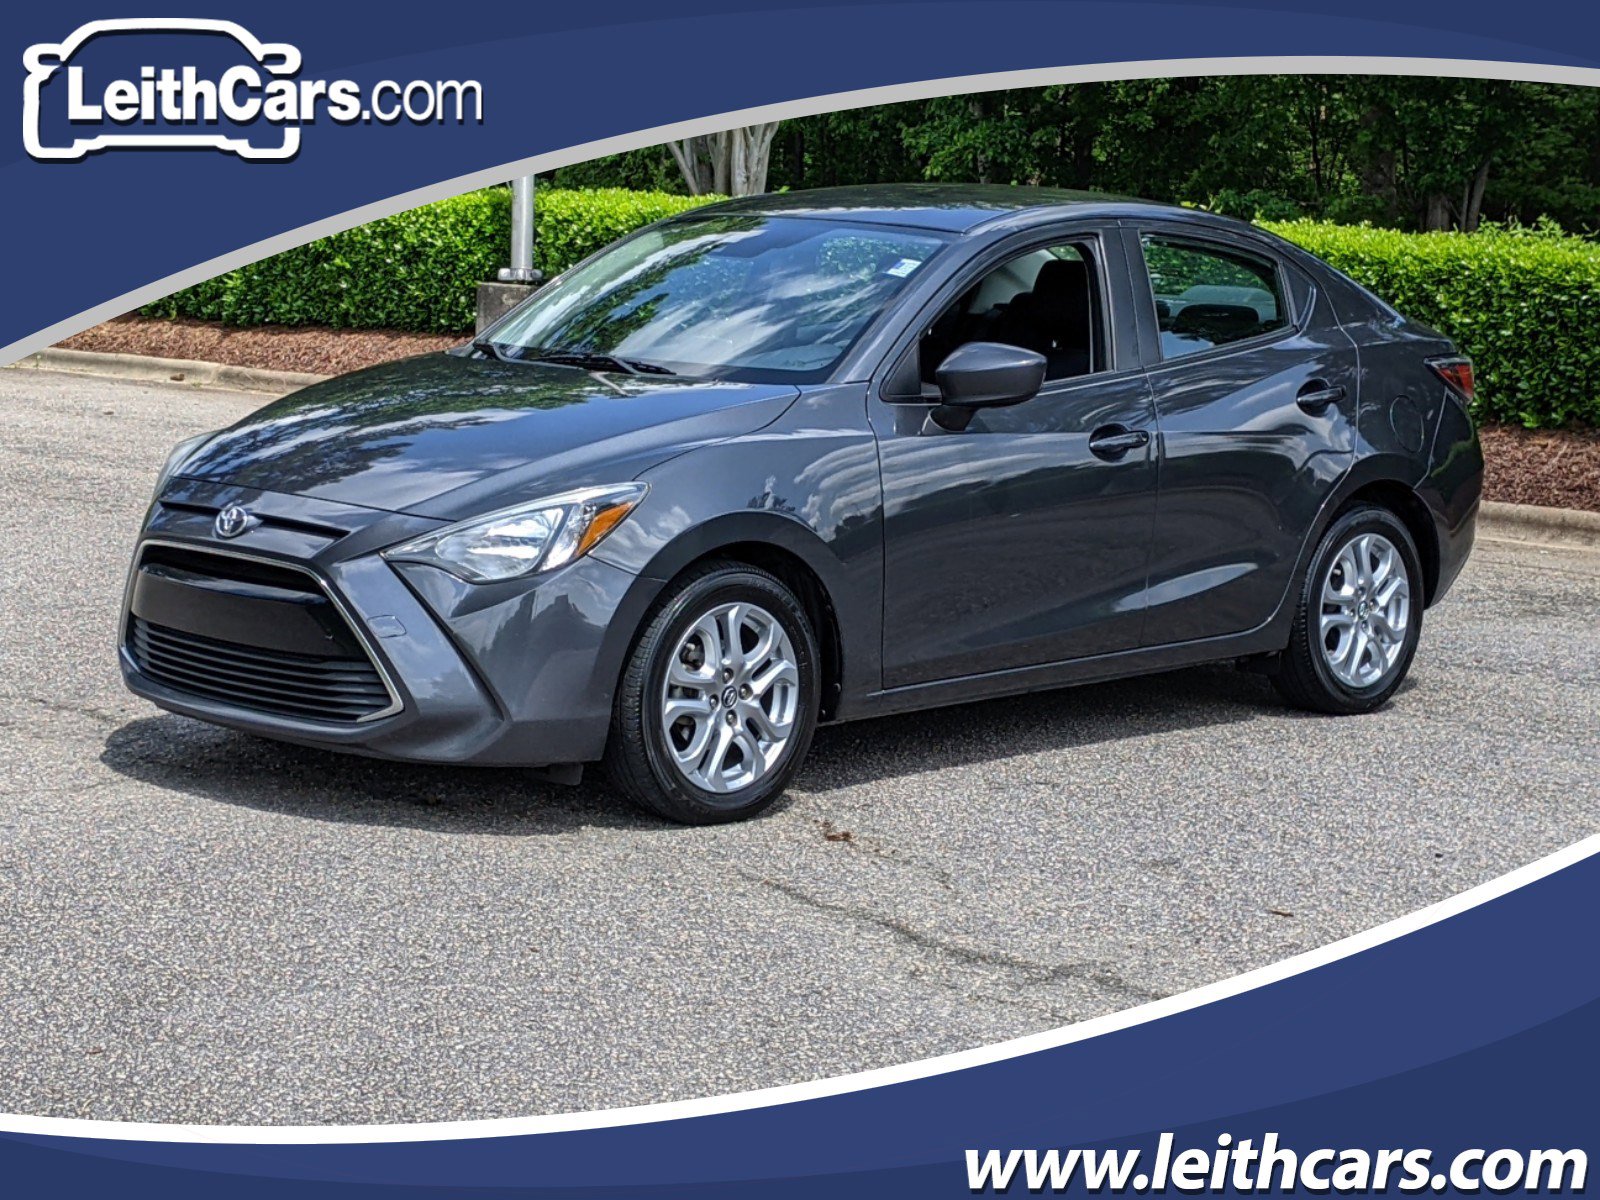 Used 2017 Toyota Yaris iA For Sale in Cary NC near Raleigh, Chapel Hill &  Durham 3MYDLBYV8HY178357